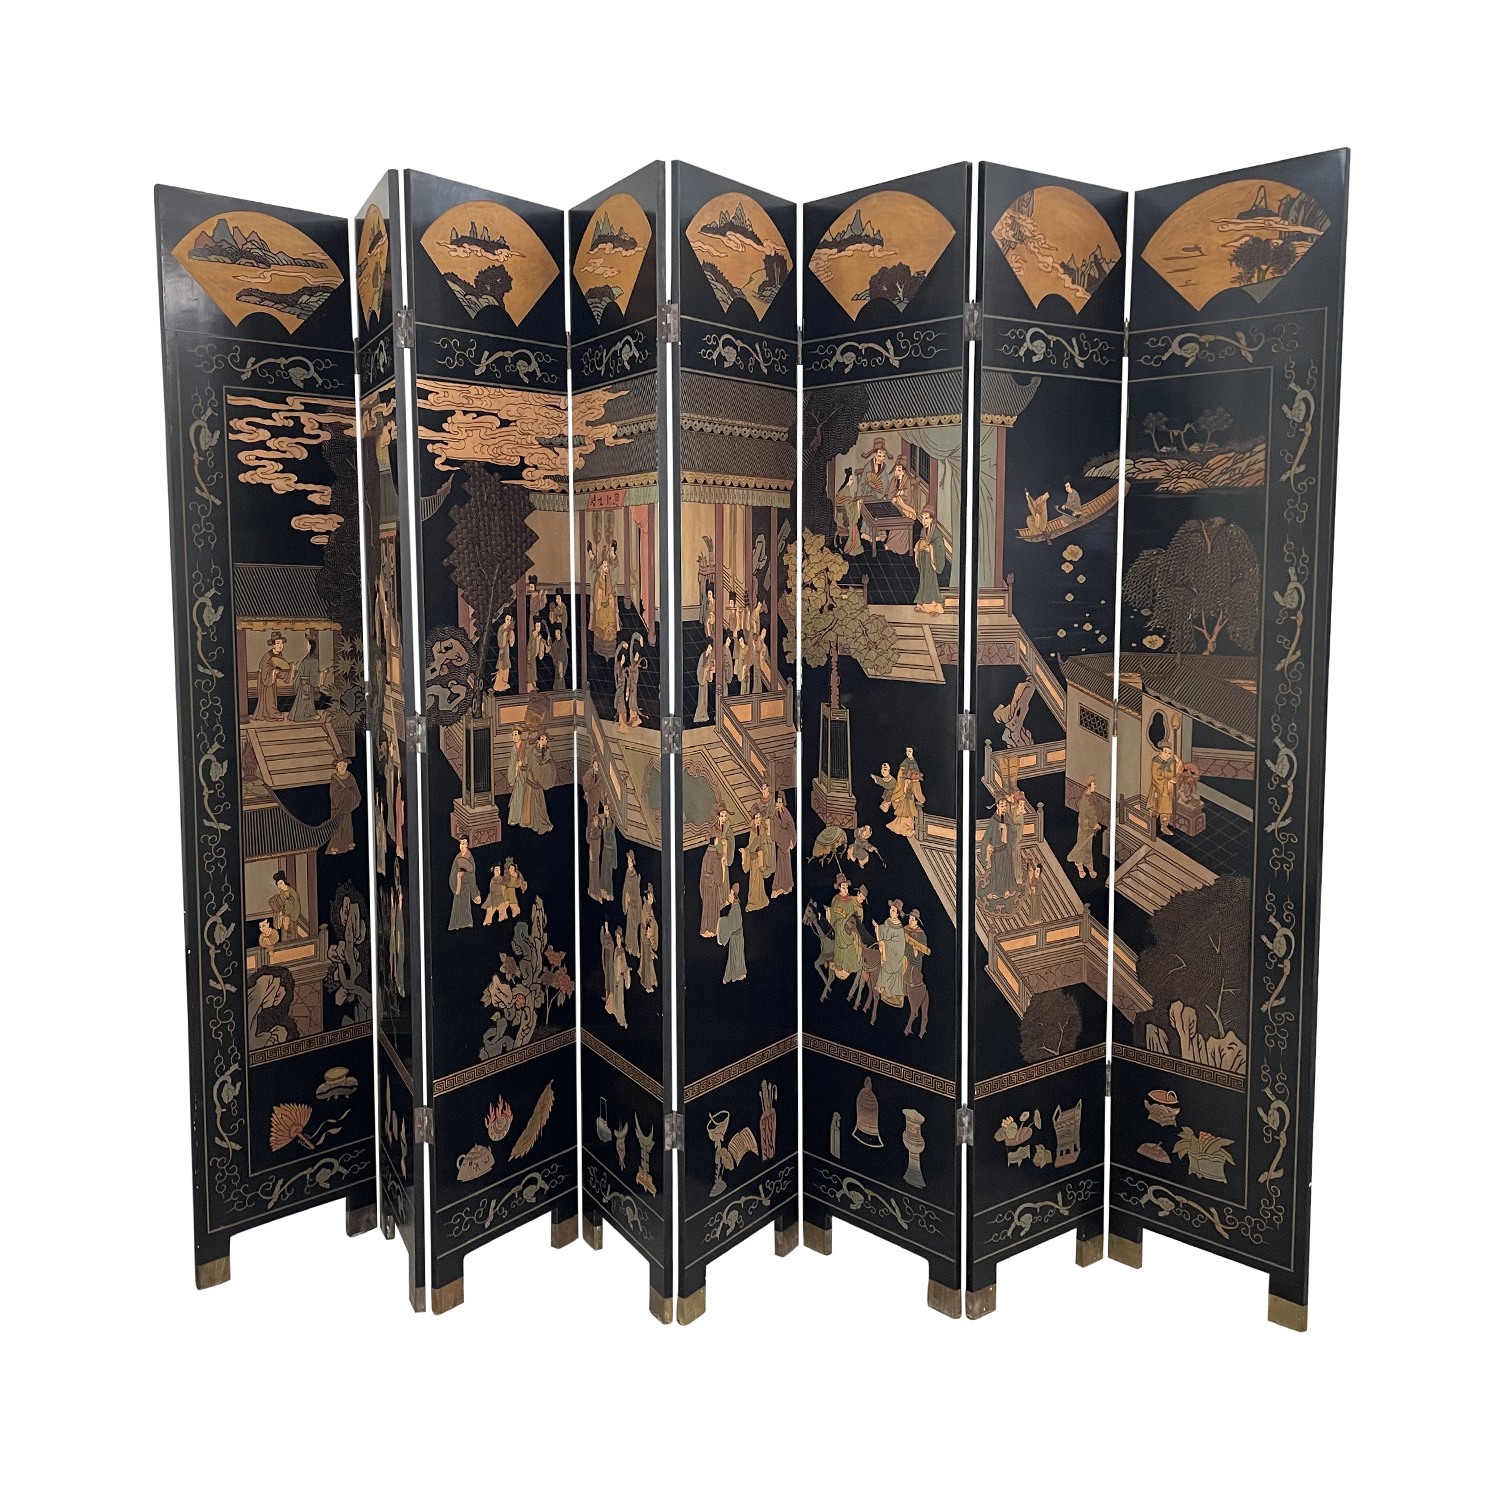 20th Century Black Chinese Lacquered Wood Screen – Vintage Room Divider